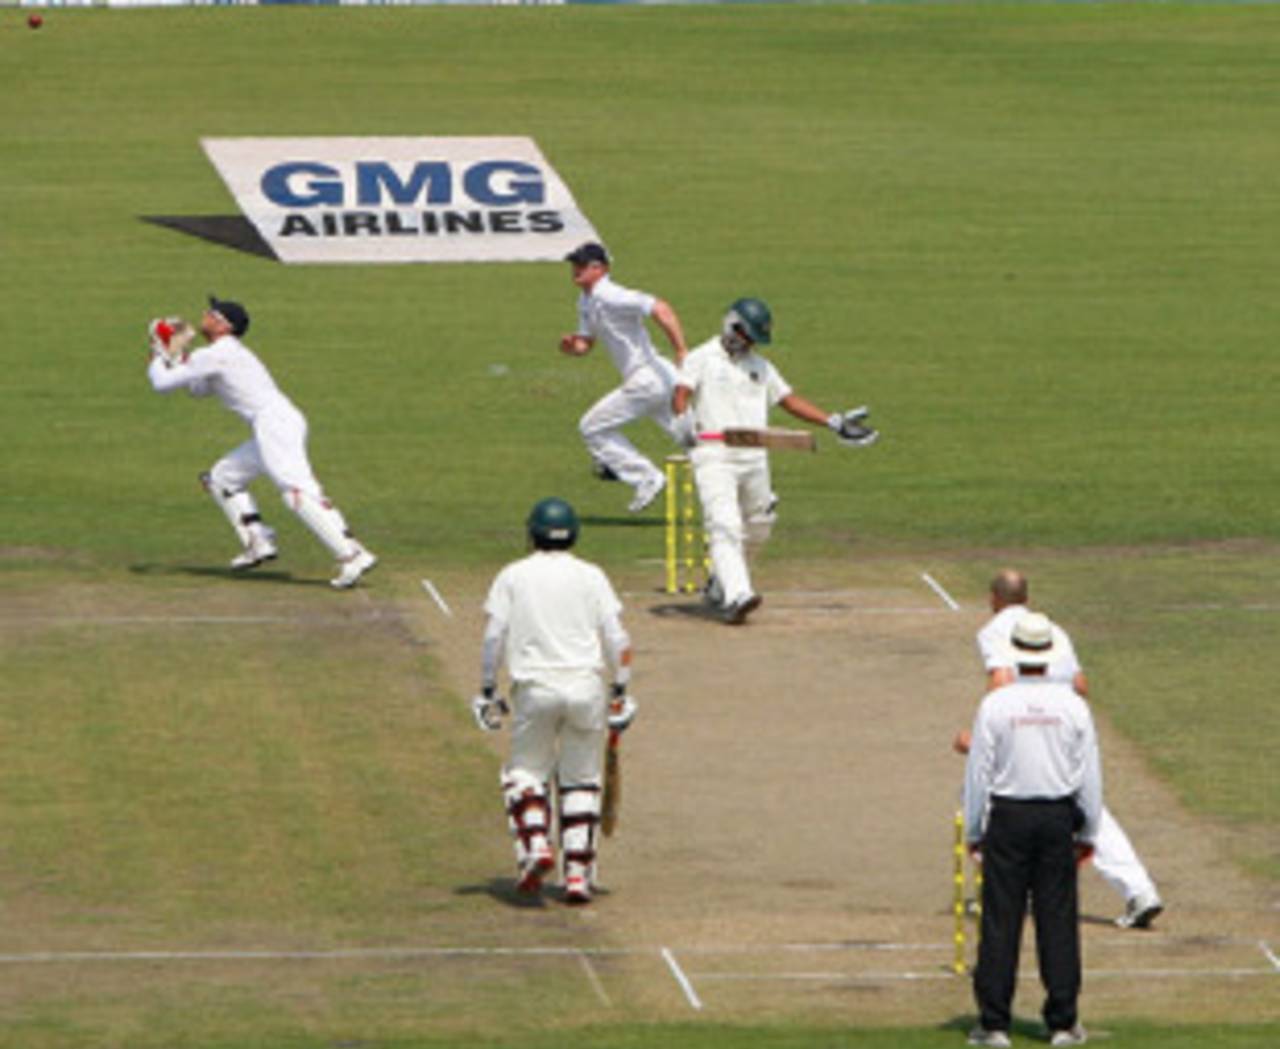 Tamim Iqbal's scintillating innings was ended when he was given out caught off James Tredwell, Bangladesh v England, 2nd Test, Dhaka, 1st day, March 20, 2010
